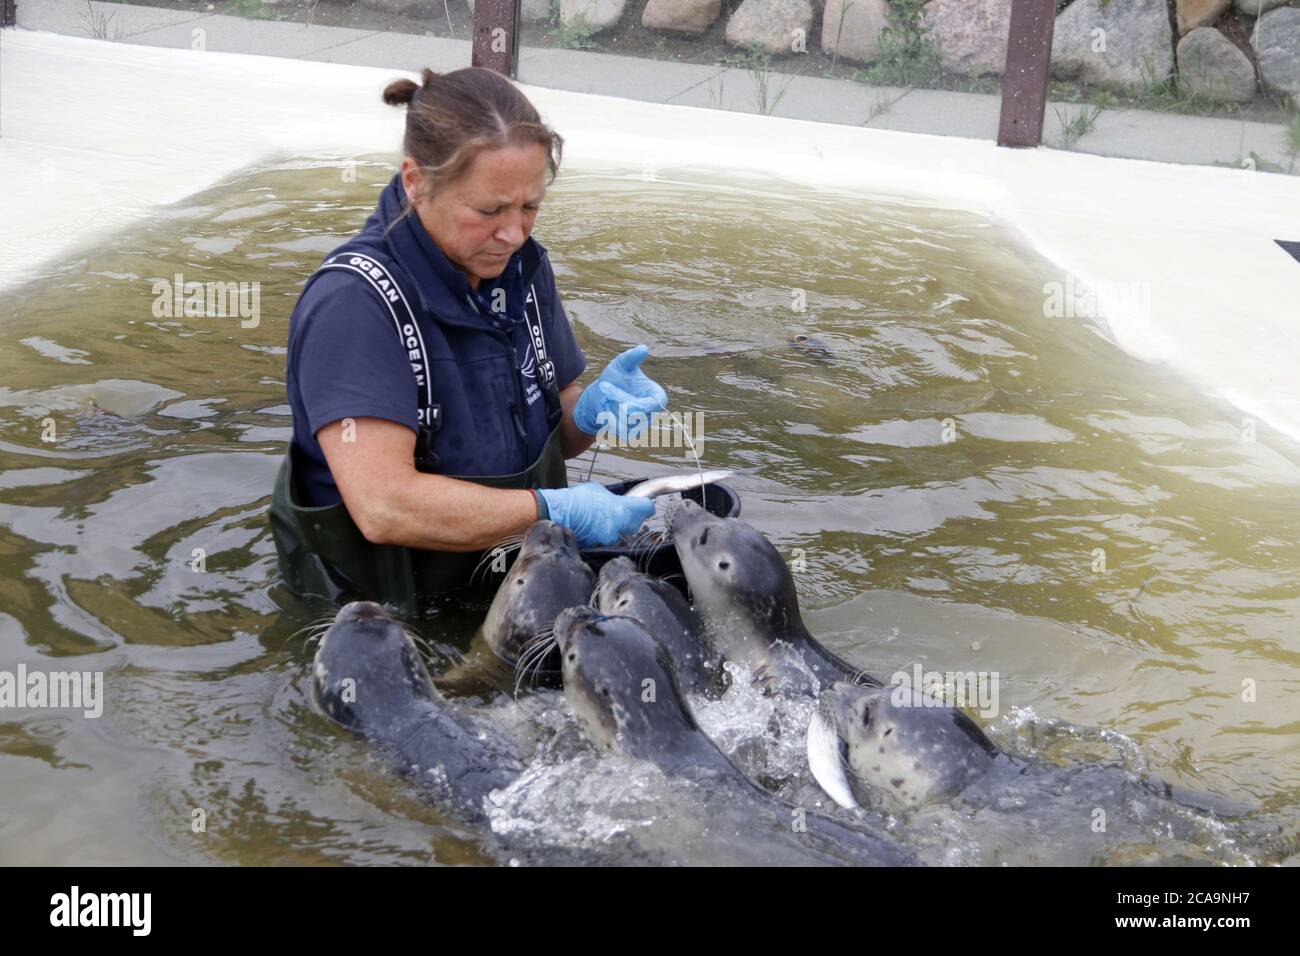 Friedrichskoog, Germany. 09th July, 2020. The manager of the seal station Frierchskoog, Tanja Rosenberger, feeds young seals in a tank with fish. The so-called howlers are permanently separated from their mothers. They would die without human help. The seal station Friedrichskoog is open for visitors again on 05.08.2020. After seven months of construction work, the new entrance building is completed. Credit: Wolfgang Runge/dpa/Alamy Live News Stock Photo